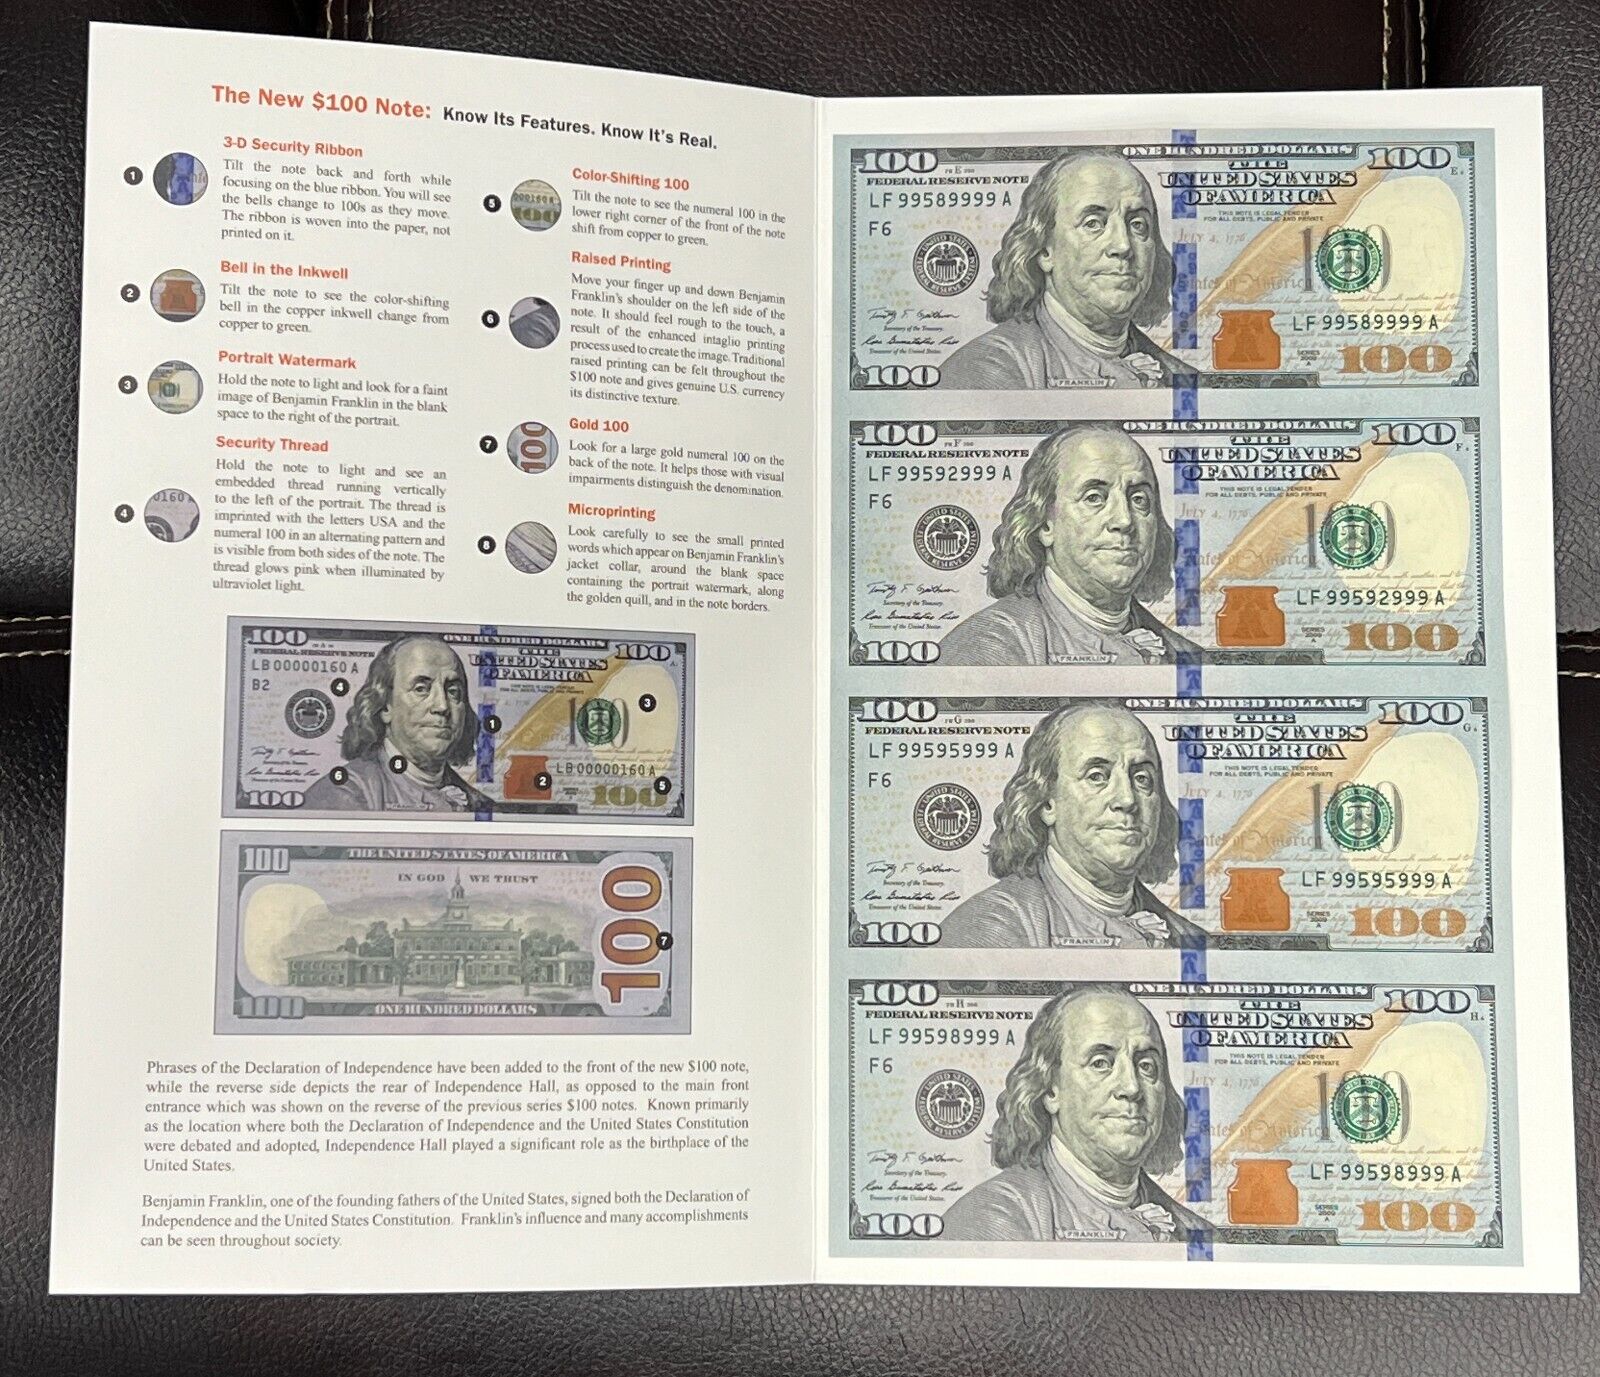 **Rare 4-Note Uncut Sheet of New Style $100 Bills - Authentic U.S. Currency**